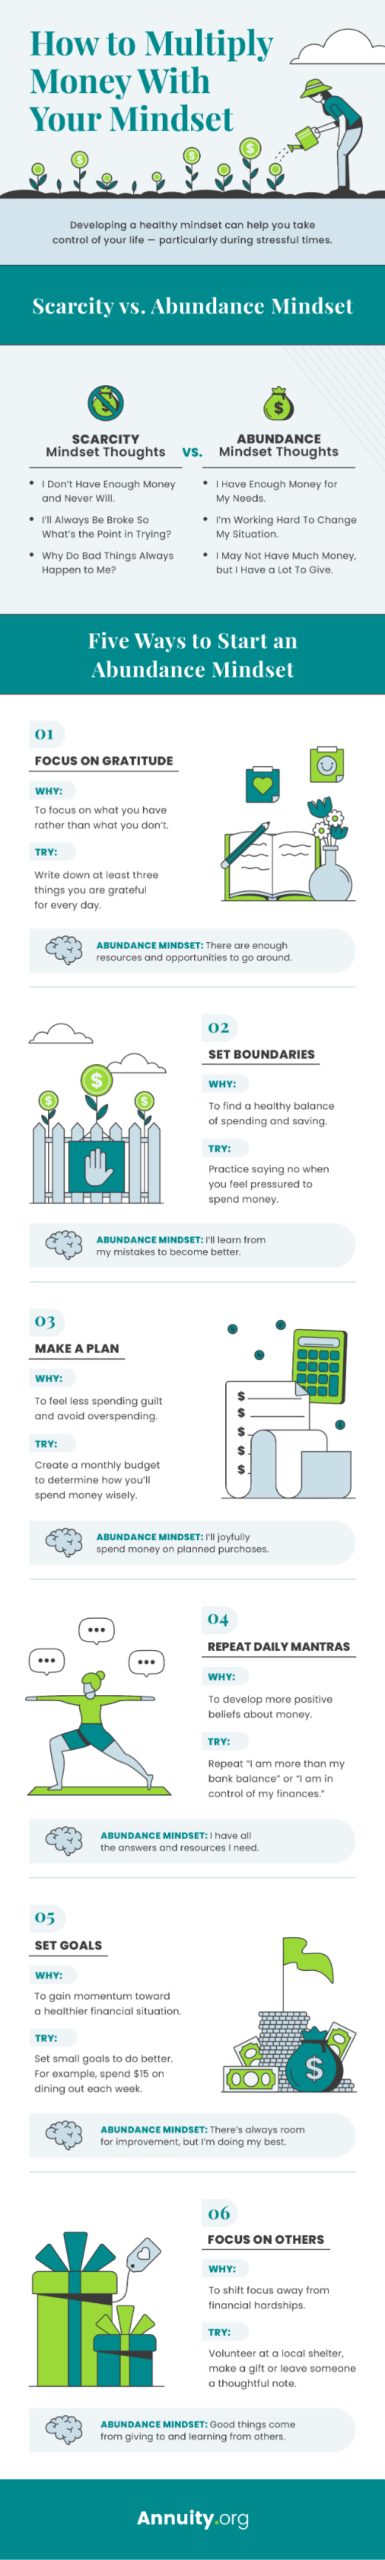 Infographic: How to Multiply Money With Your Mindset